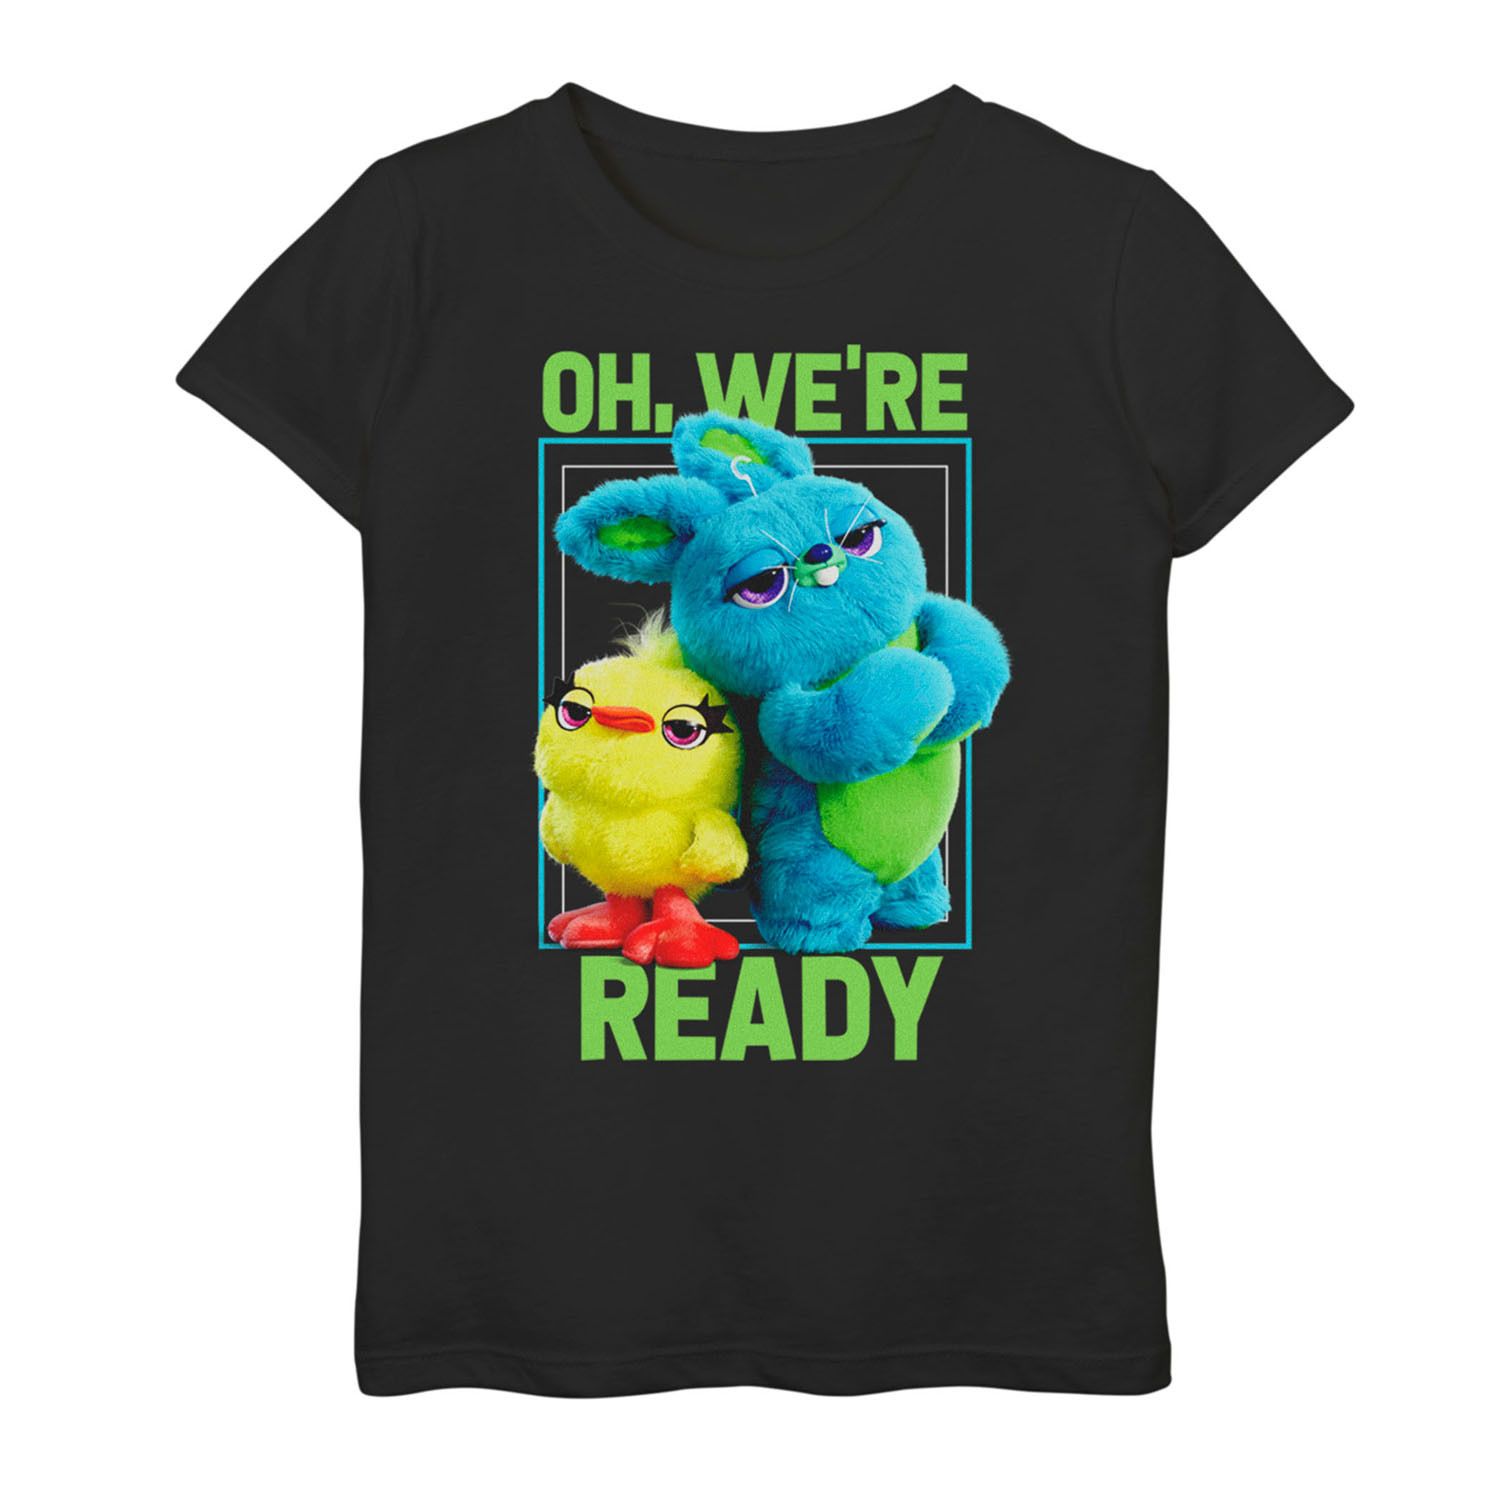 Image for Disney / Pixar Toy Story 4 Girls 7-16 Ducky & Bunny "We're Ready" Graphic Tee at Kohl's.